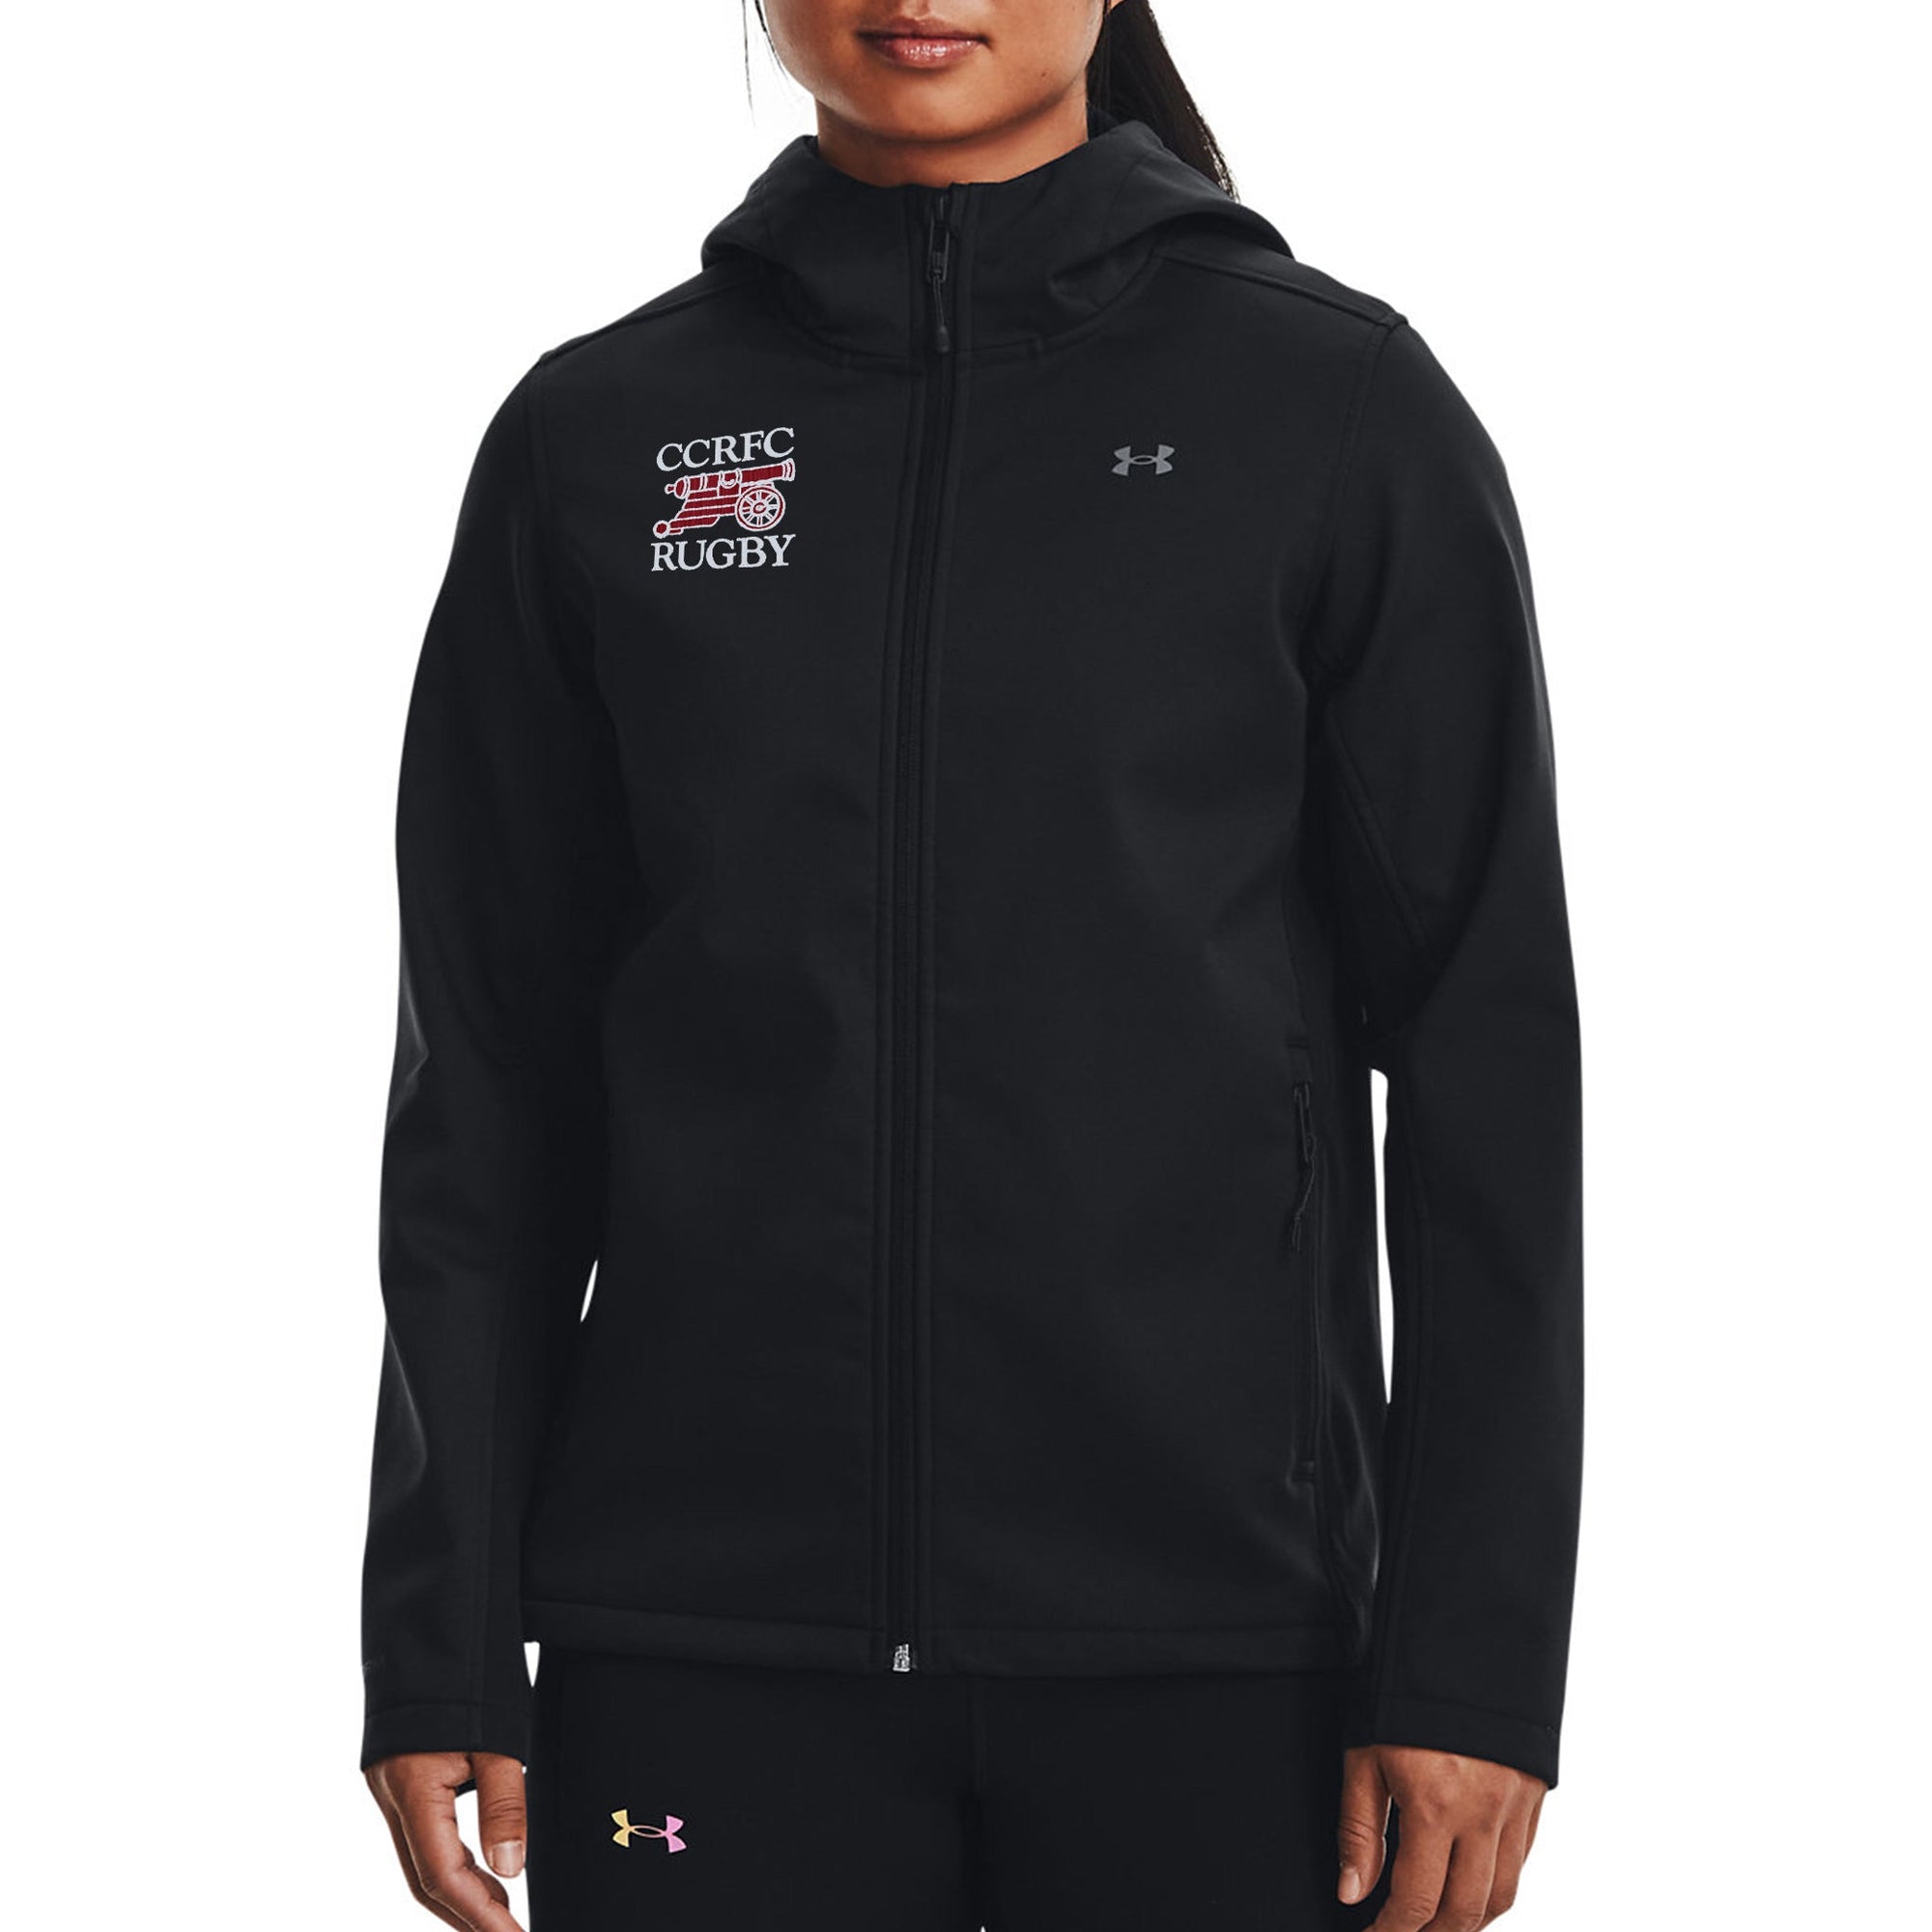 Rugby Imports Concord Carlisle RFC Women's Coldgear Hooded Infrared Jacket